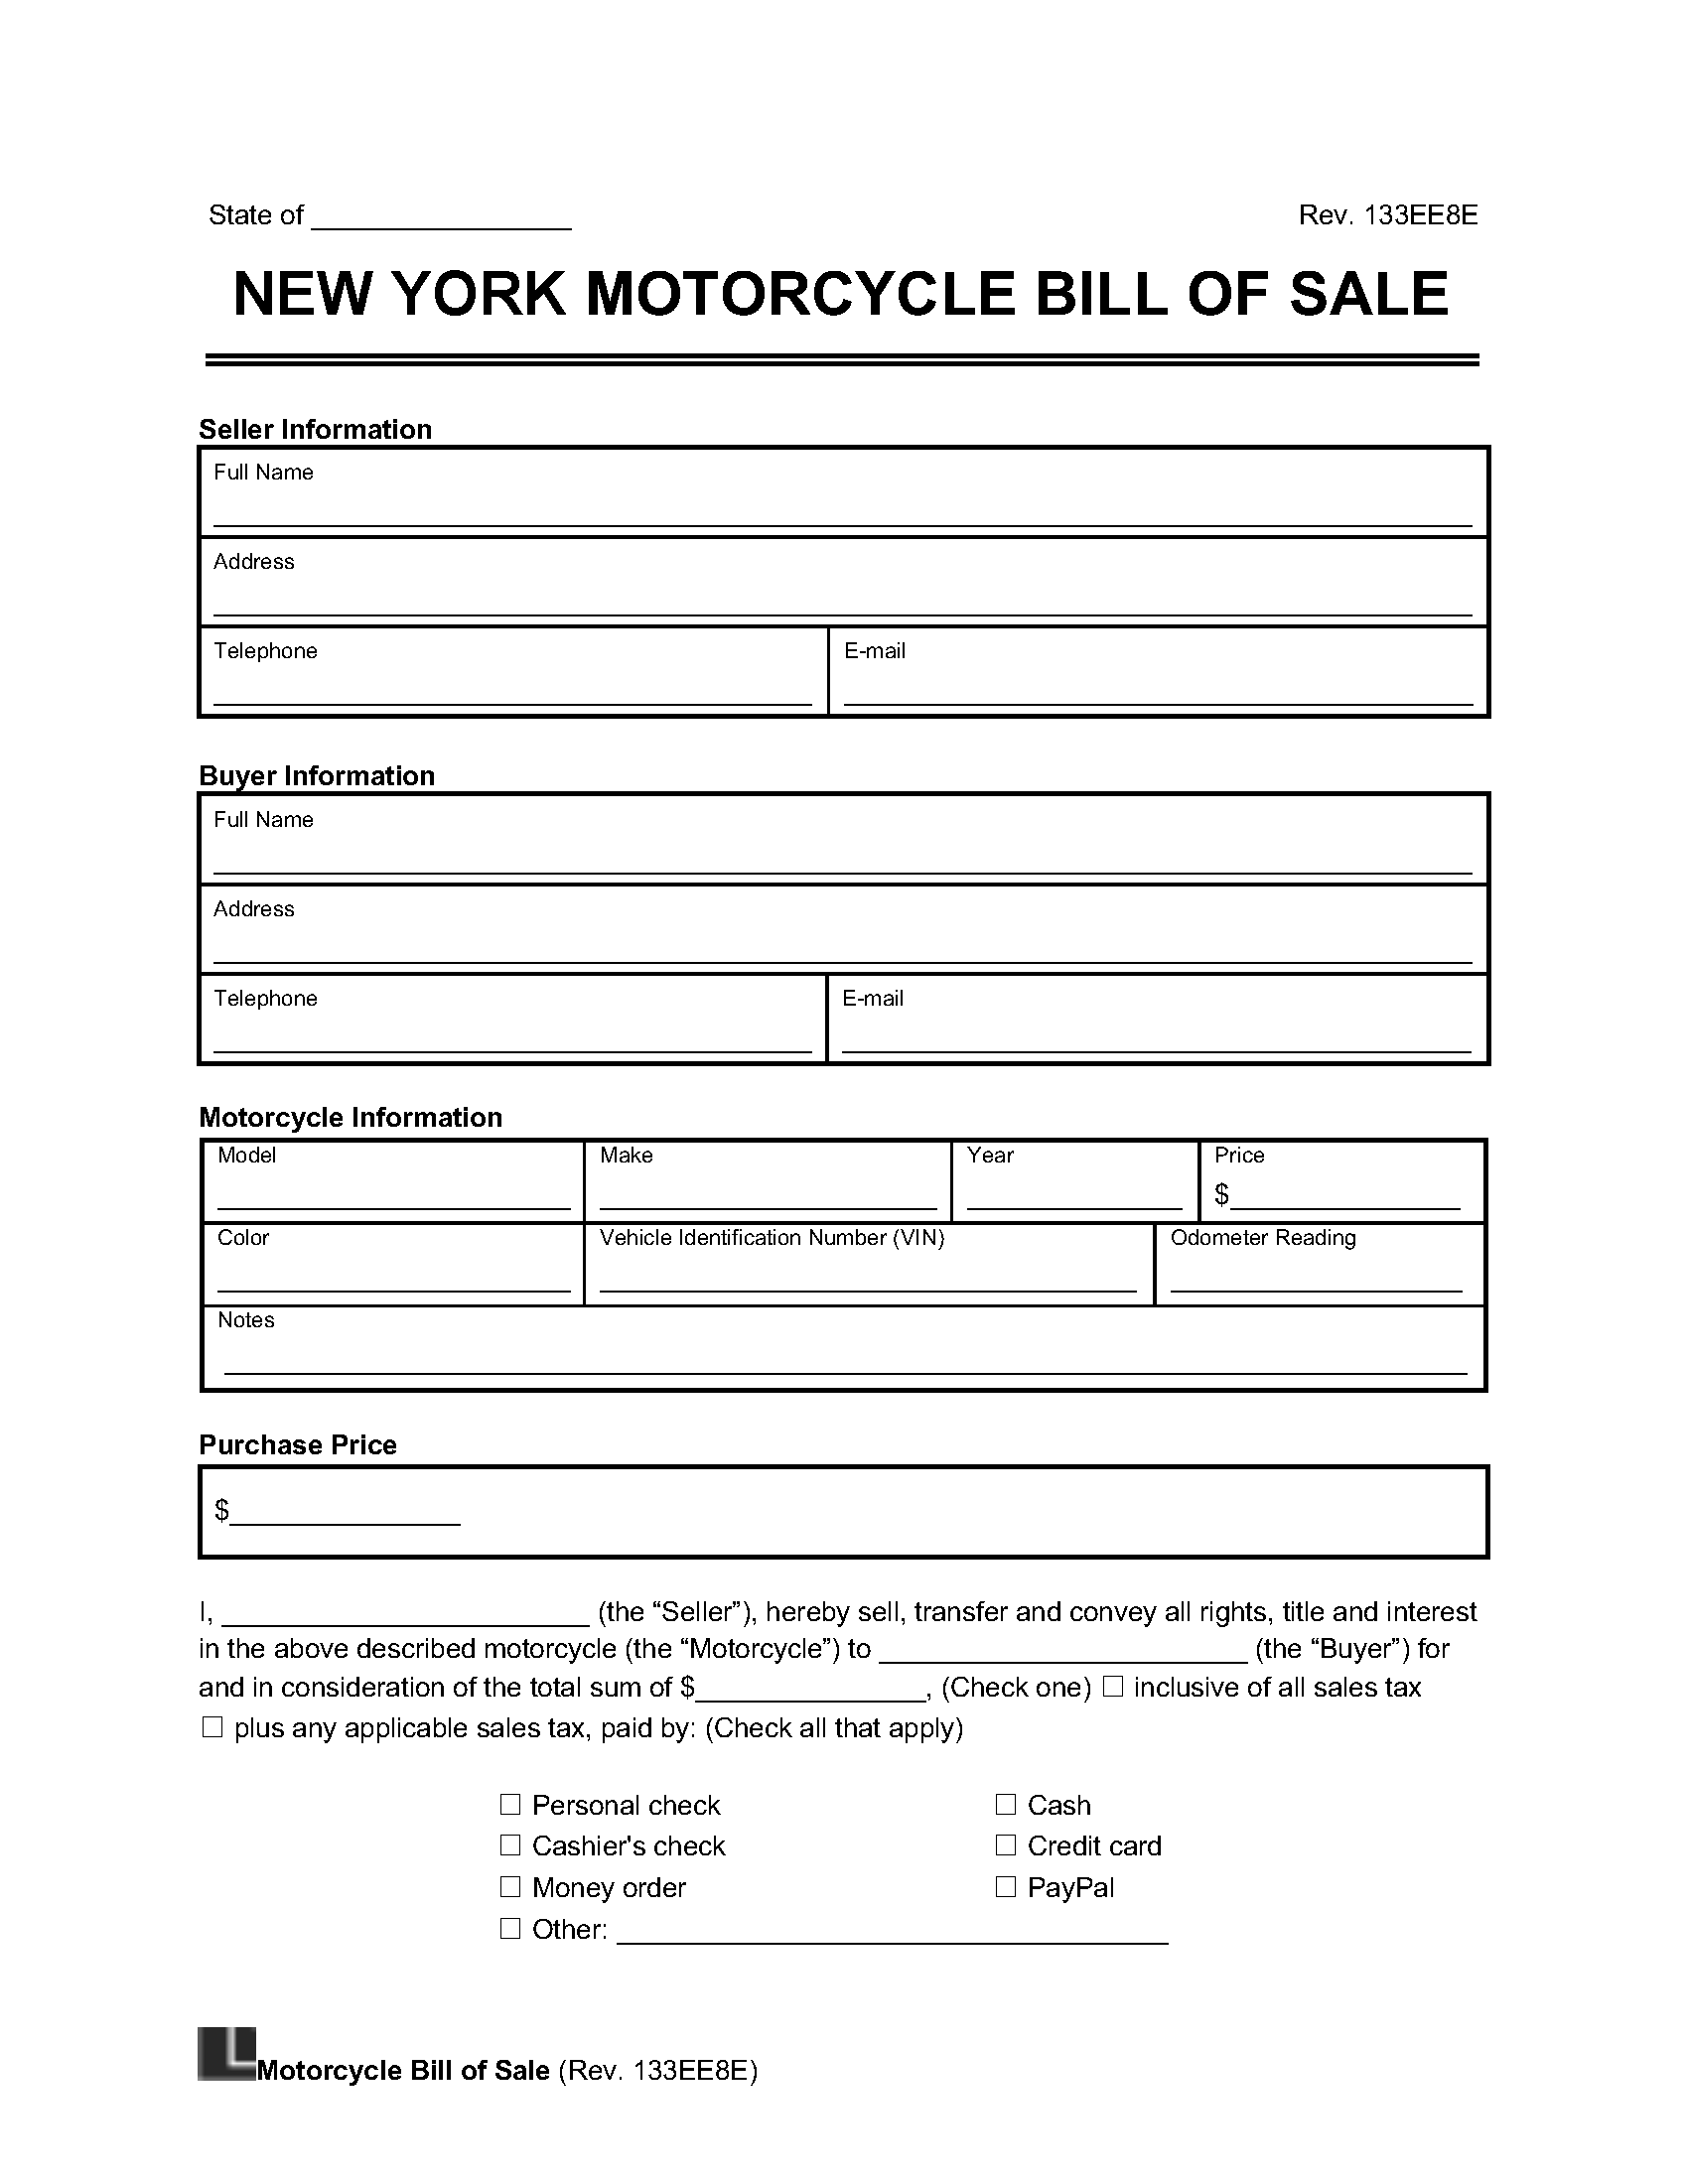 new york motorcycle bill of sale